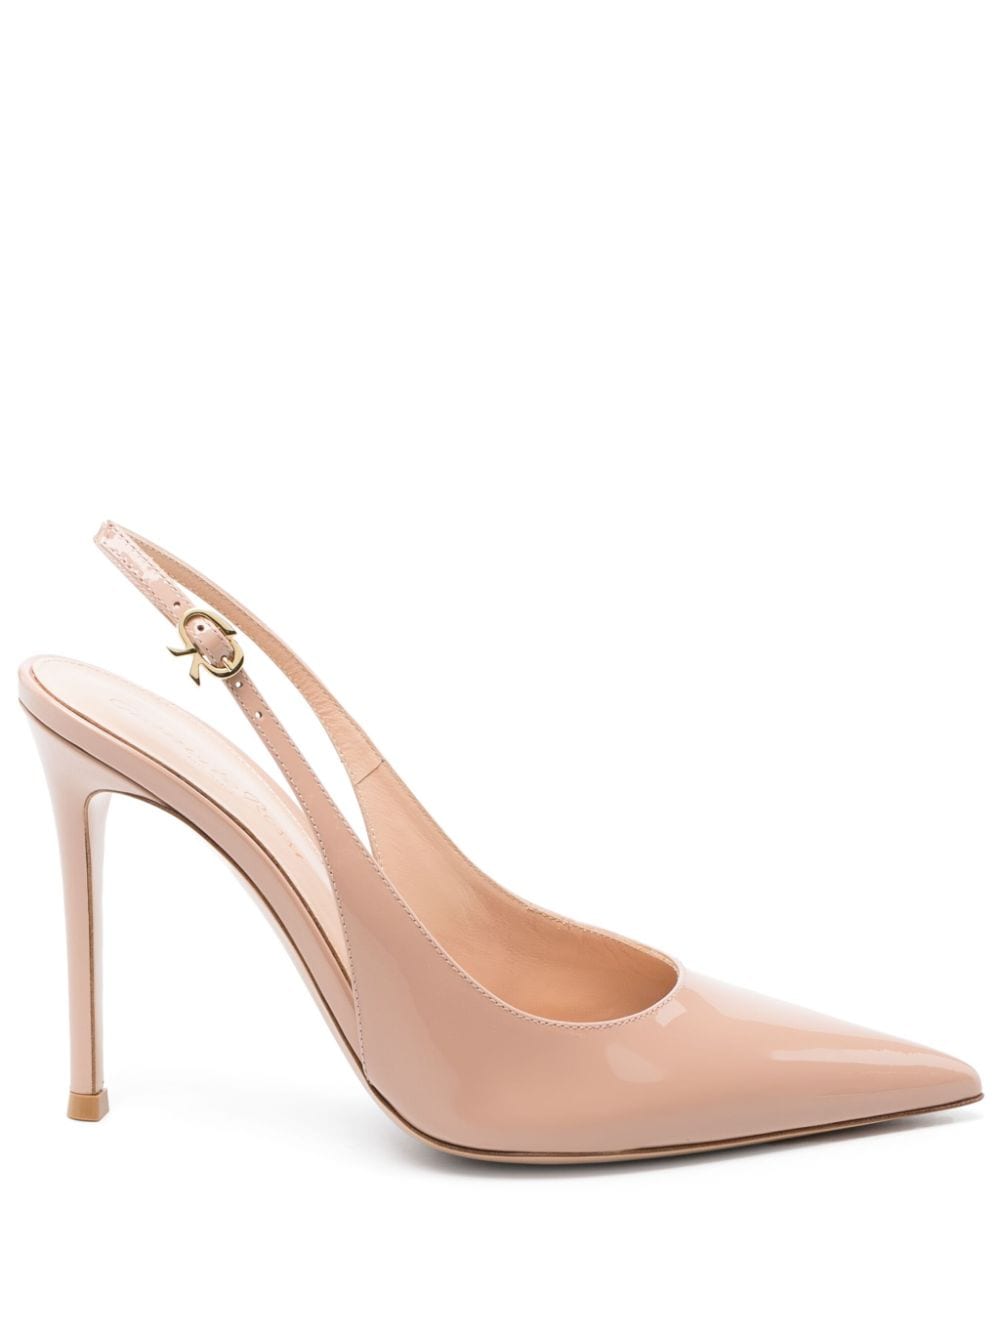 Gianvito Rossi 112mm Pointed-toe Leather Pumps In Neutrals